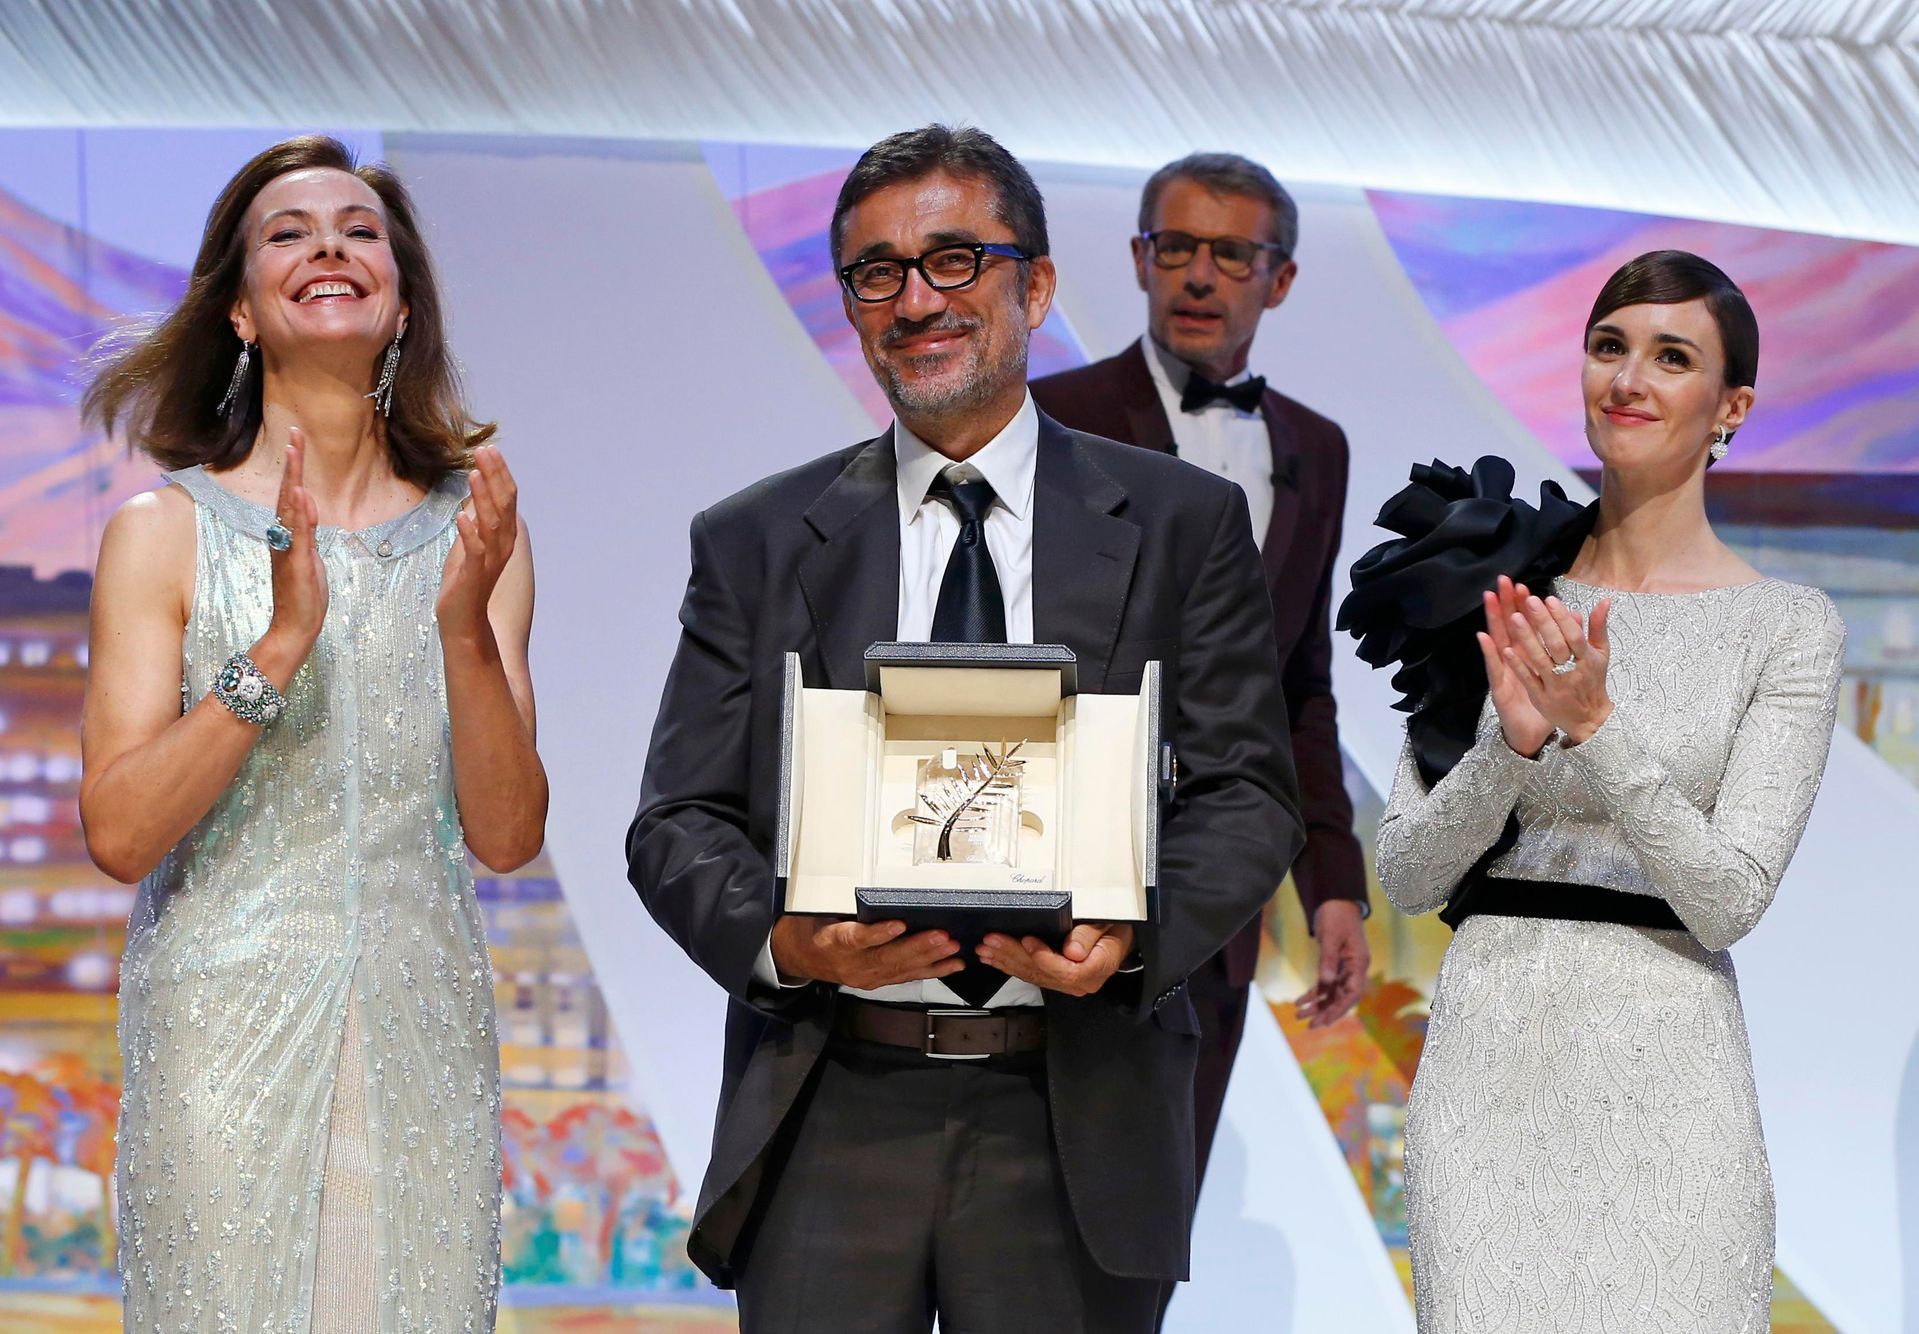 Director Nuri Bilge Ceylan, Palme d'Or award winner for his film &quot;Winter Sleep&quot;, poses on stage with jury member Carole Bouquet and actress Paz Vega during the closing ceremony of the 67th C